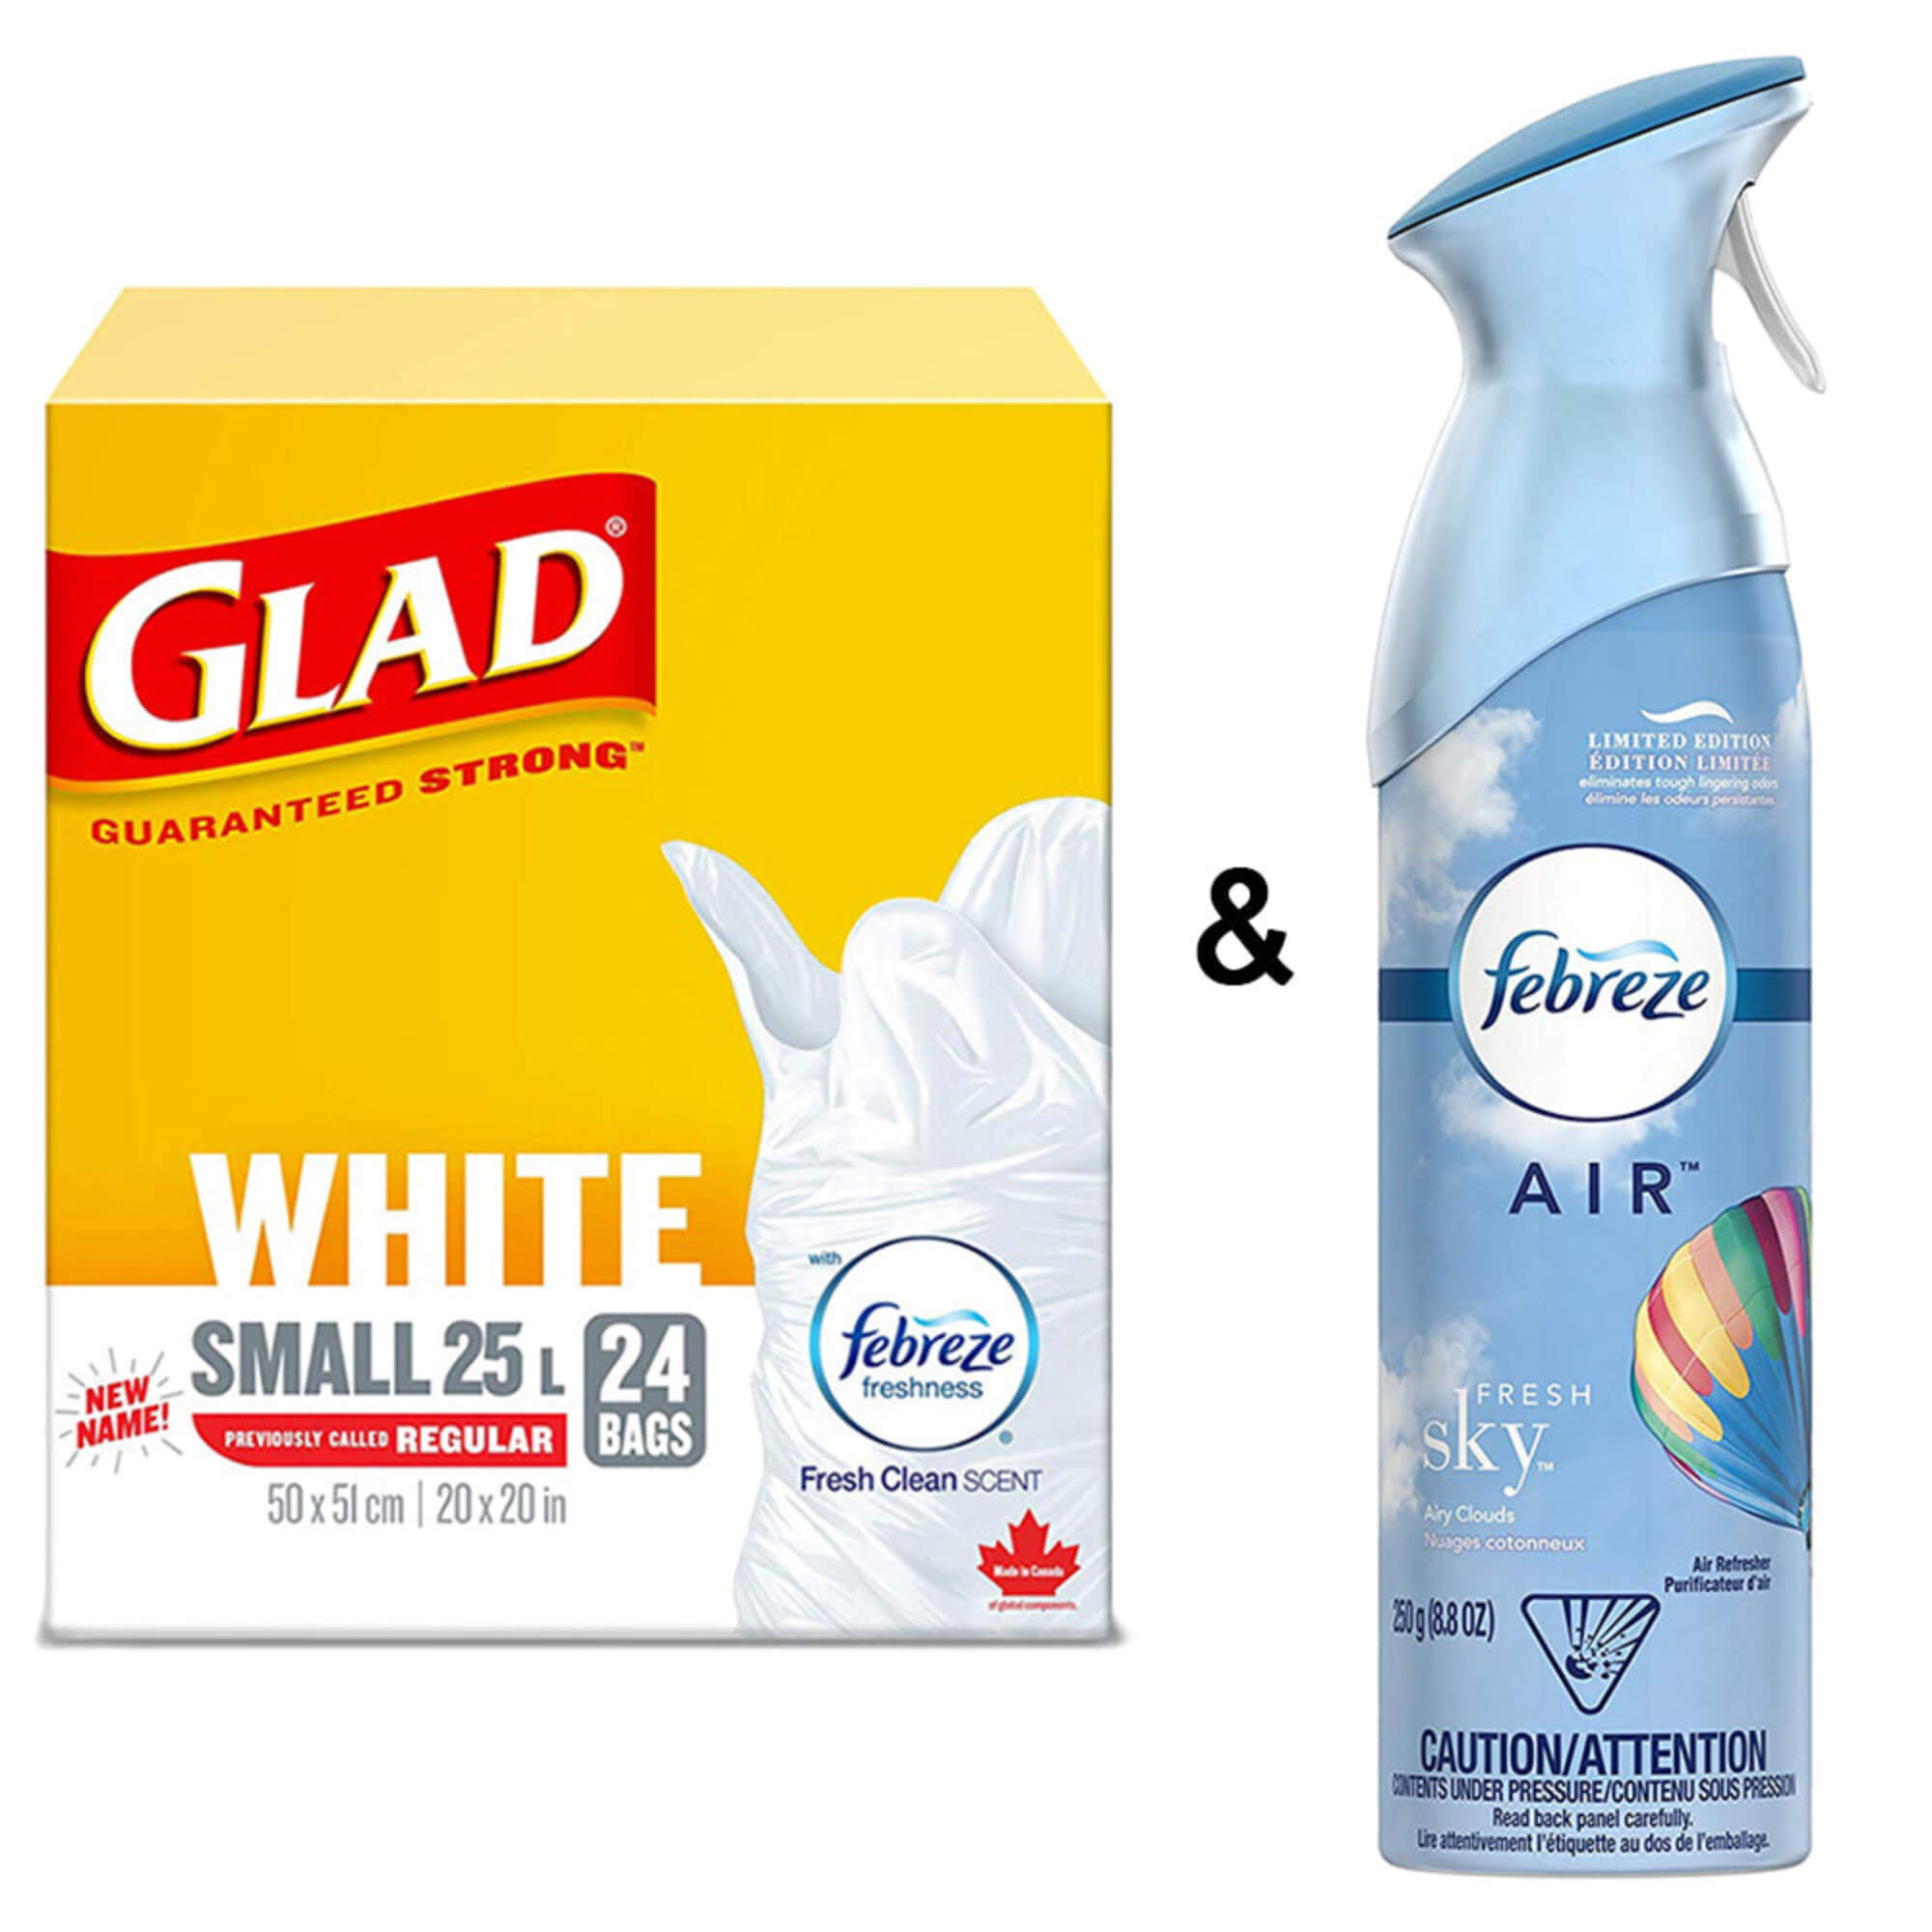 Air Freshener & Glad White Garbage - Small 25 Ltr - 24 Bags